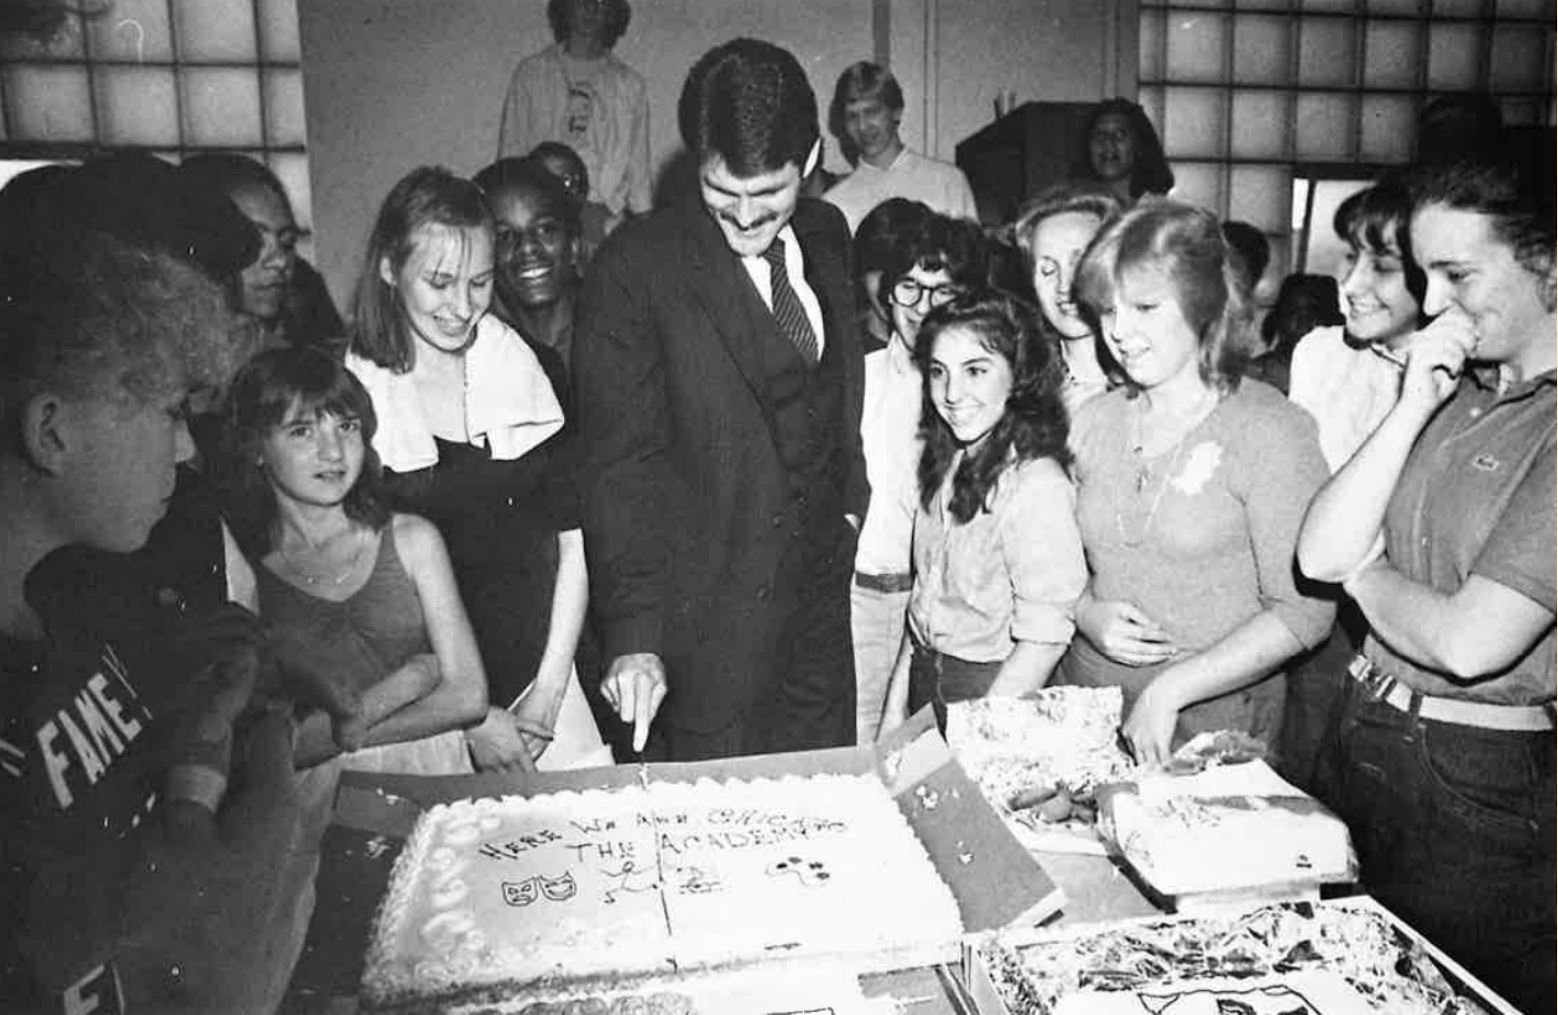 Larry Jordan cuts into a cake on the first day of school at The Academy, surrounded by excited students.